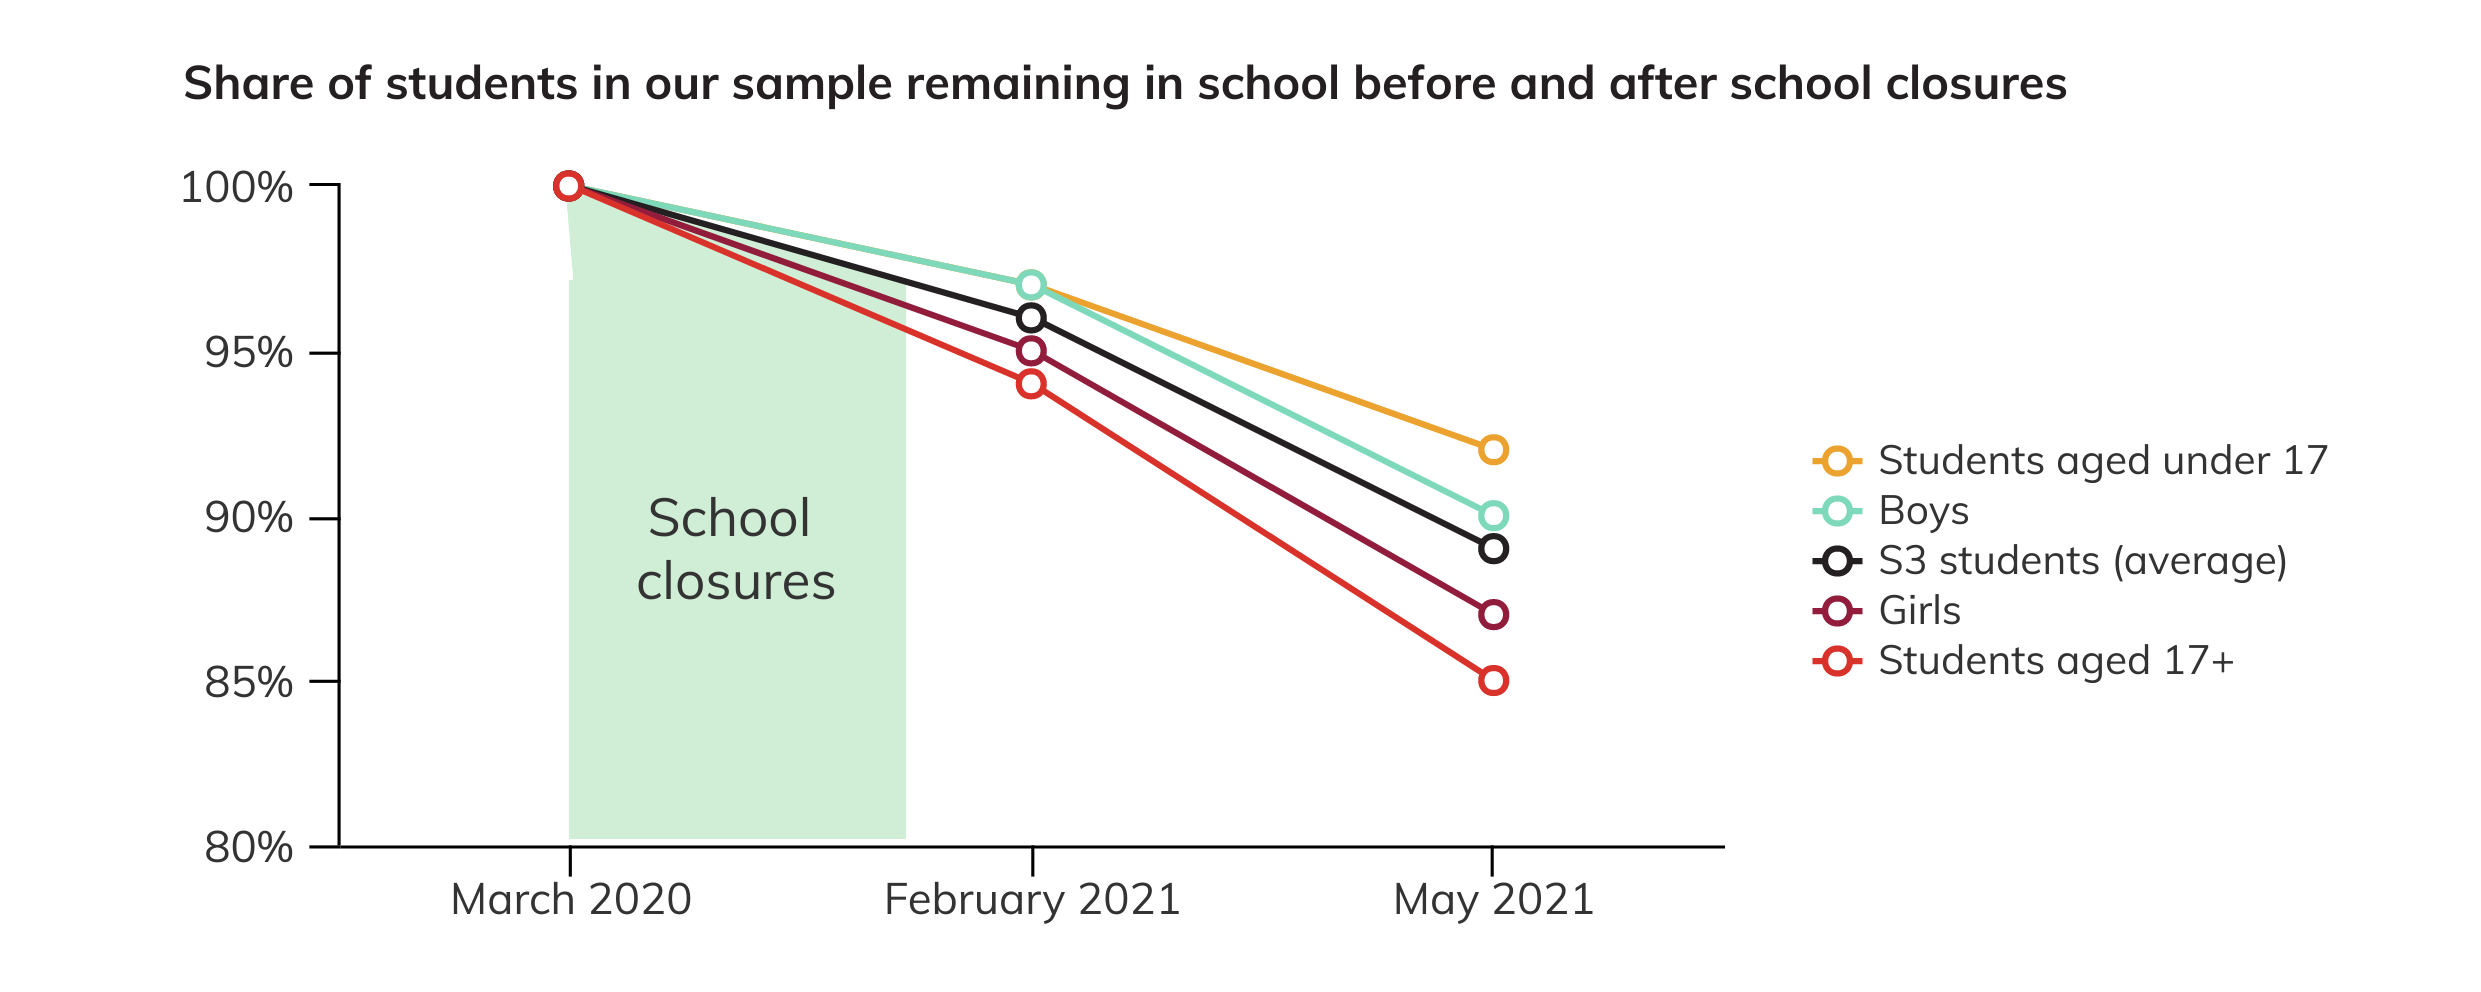 Student retention before and after school closures in Rwanda